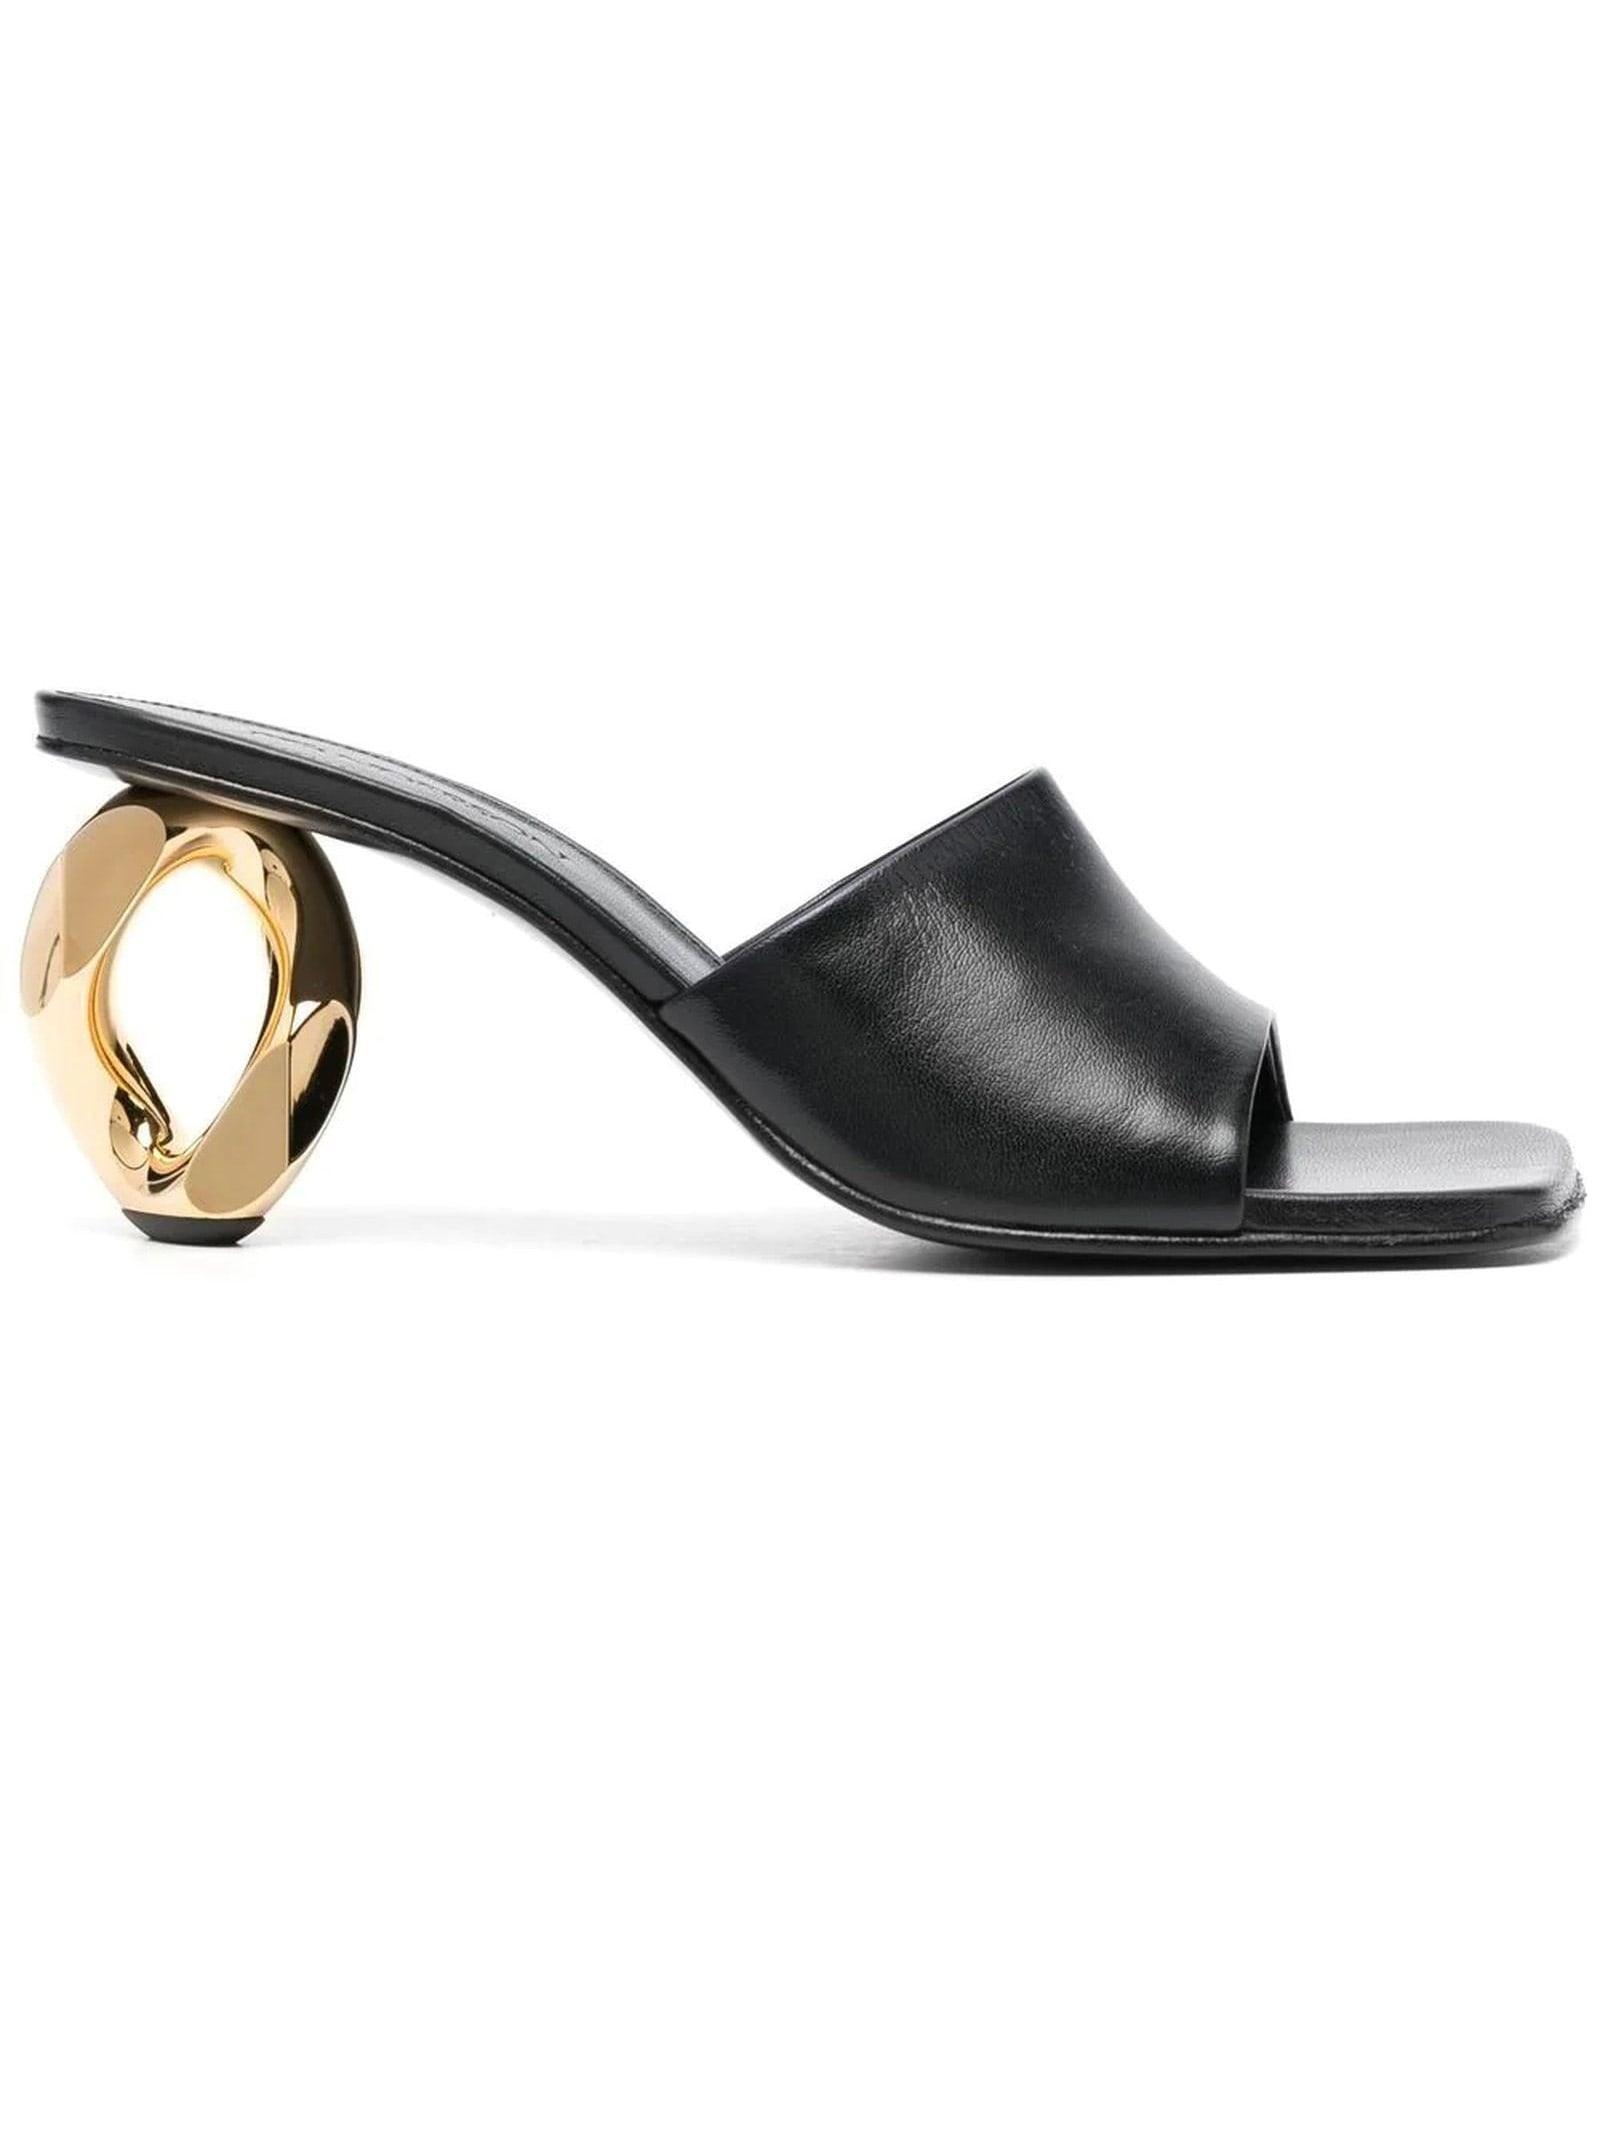 JW Anderson Black Calf Leather Sandals | Lyst